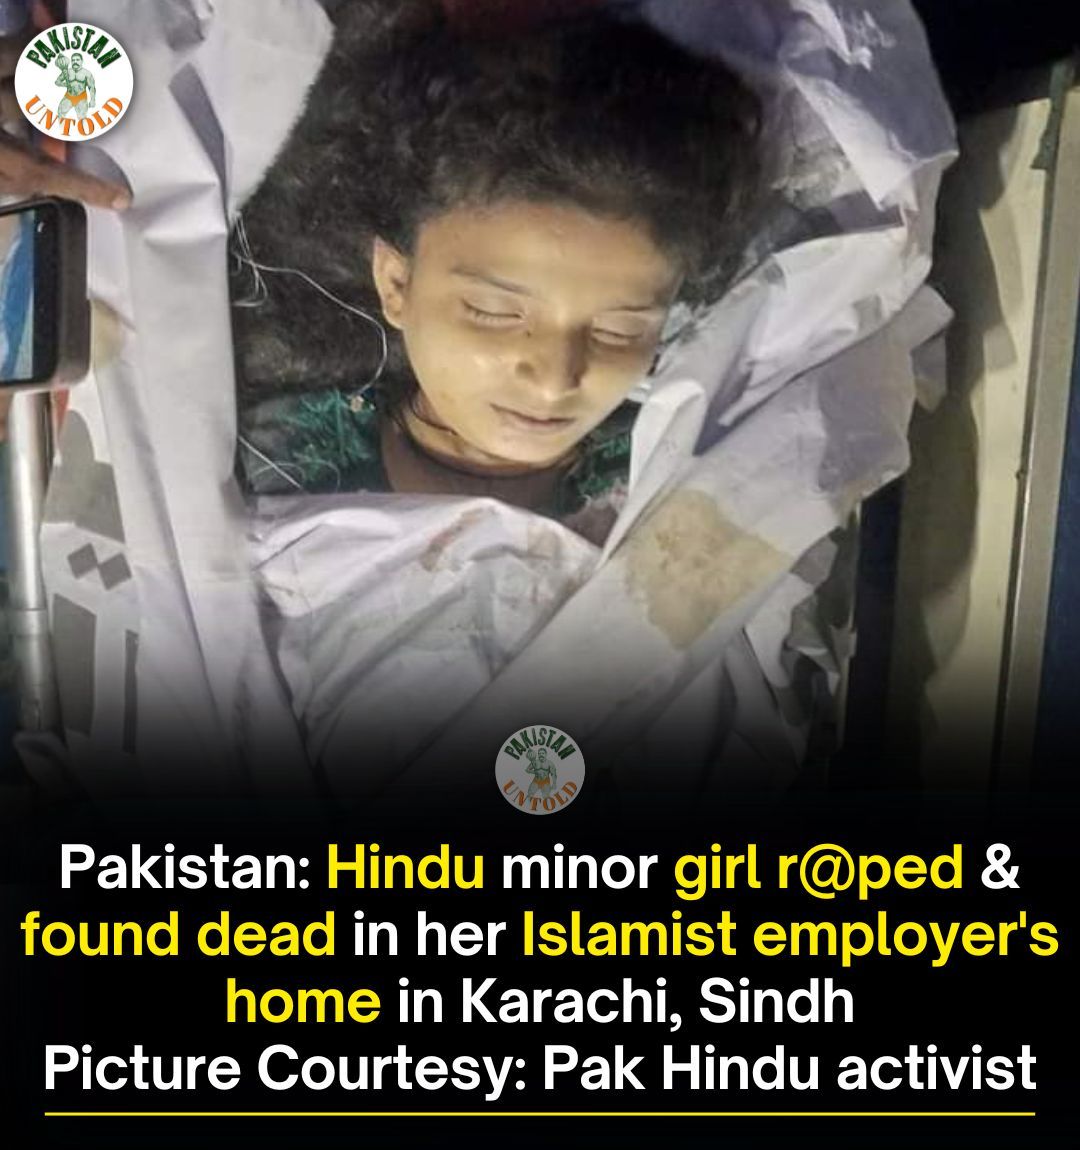 R@ped and Murd€red in Islamic republic - This poor Pakistani Hindu minor girl wanted to support her poor family. Now gone forever.